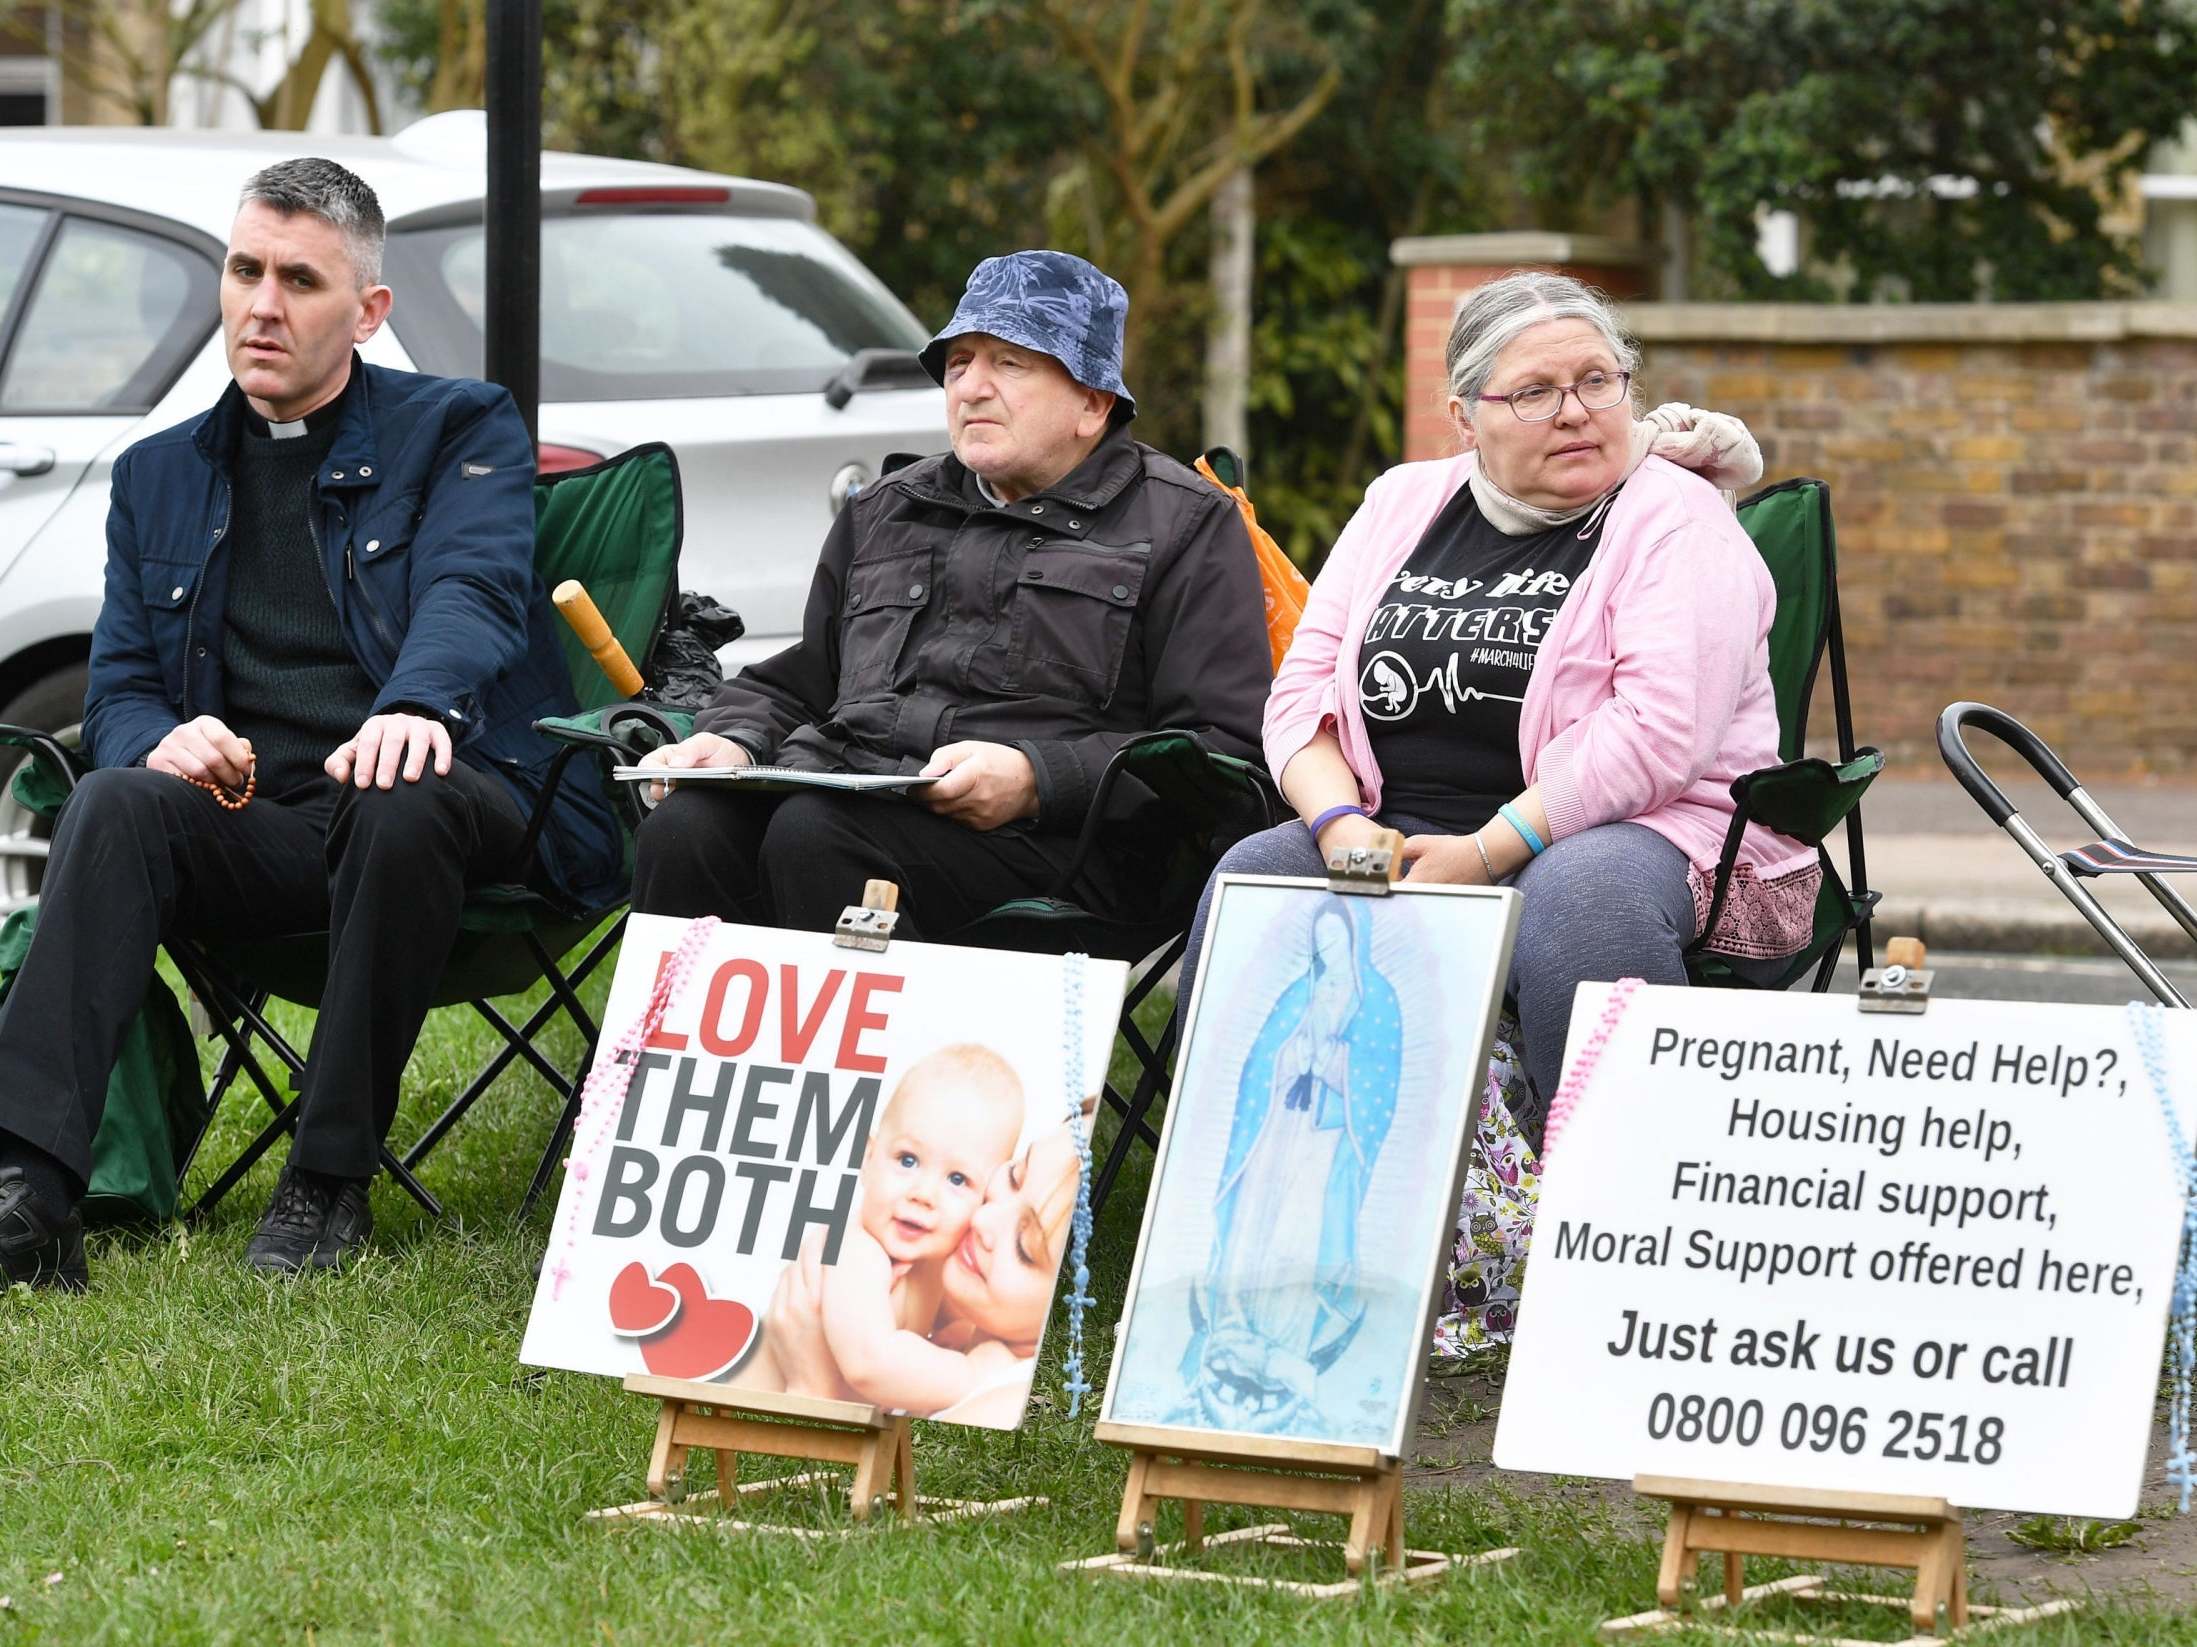 Anti-abortion campaigners were banned by Ealing Council from protesting outside a west London clinic in April 2018